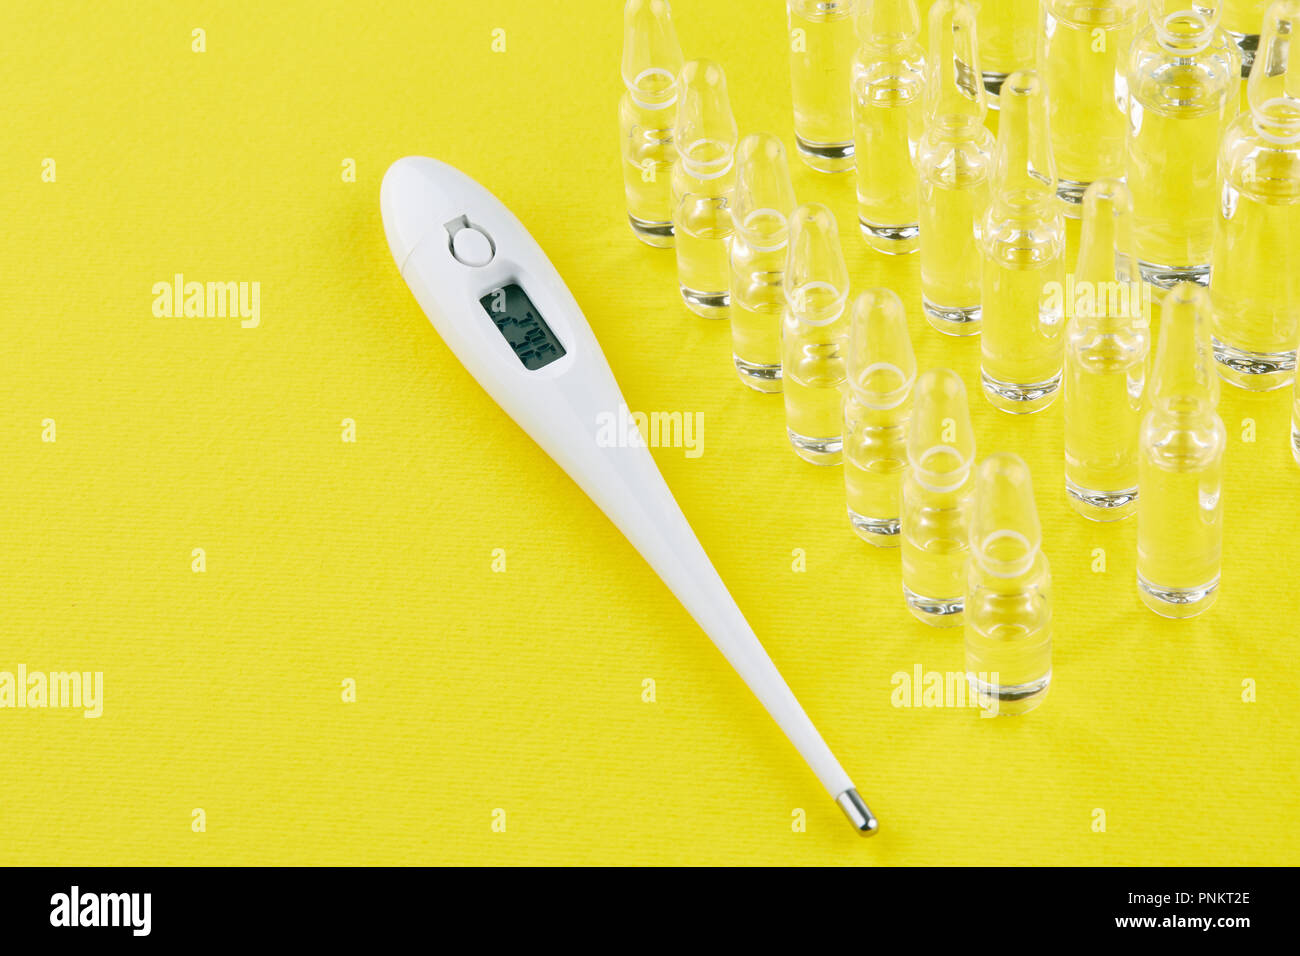 Liquid thermometer stock photo. Image of energy, climate - 192282724